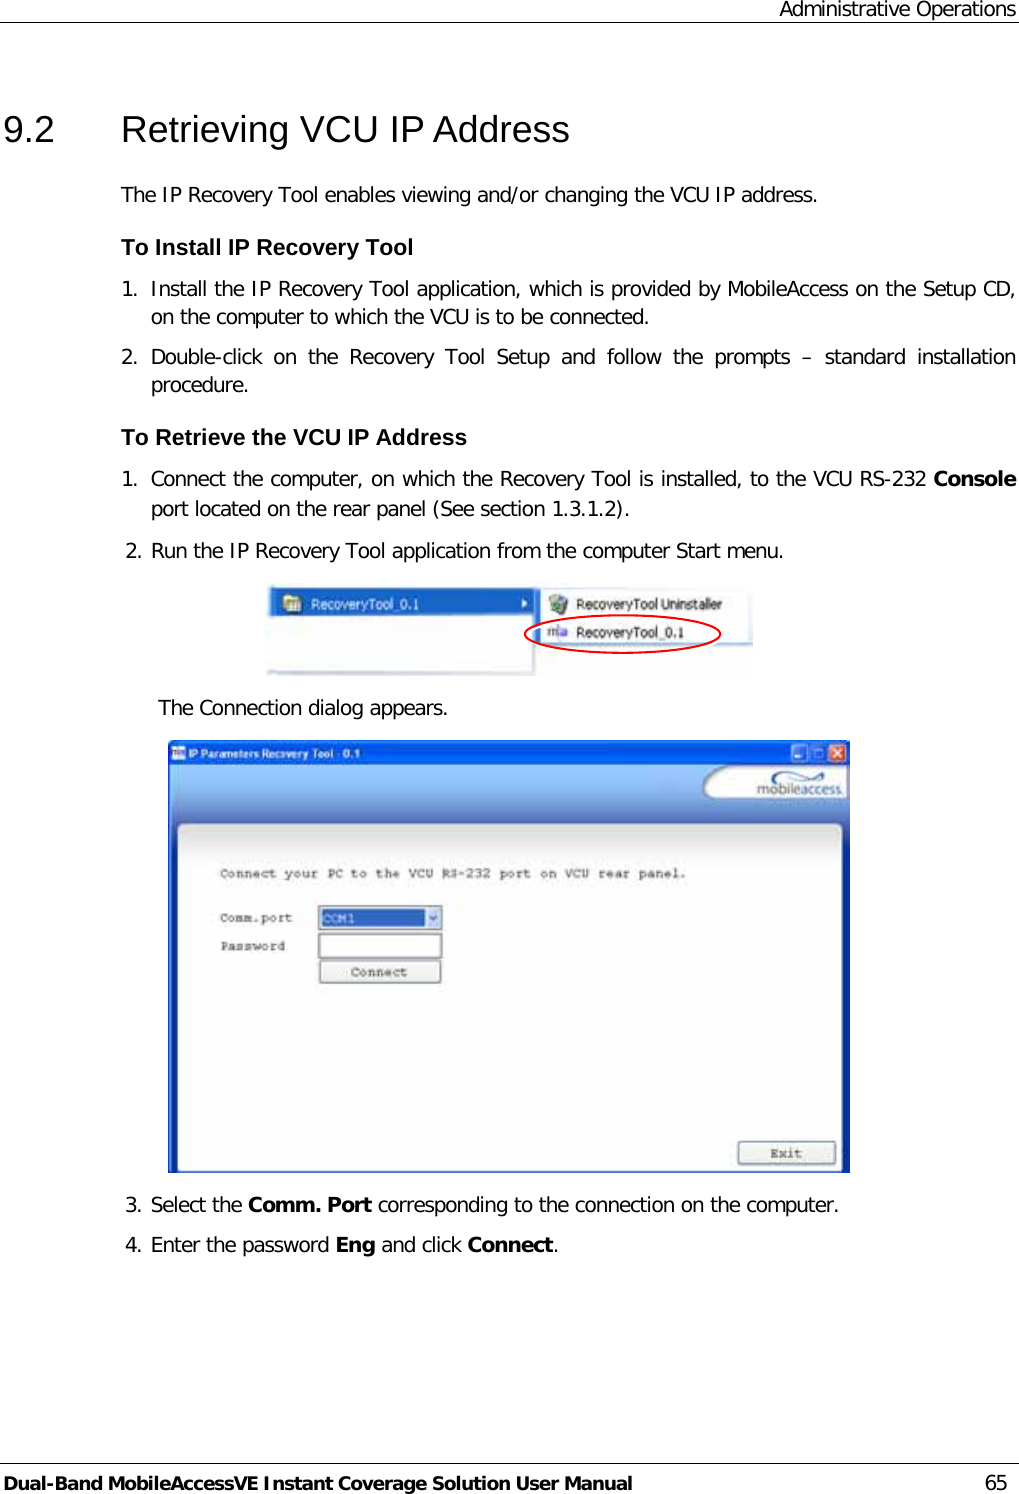 Administrative Operations Dual-Band MobileAccessVE Instant Coverage Solution User Manual 65 9.2  Retrieving VCU IP Address The IP Recovery Tool enables viewing and/or changing the VCU IP address. To Install IP Recovery Tool 1. Install the IP Recovery Tool application, which is provided by MobileAccess on the Setup CD, on the computer to which the VCU is to be connected. 2. Double-click on the Recovery Tool Setup and follow the prompts –  standard installation procedure. To Retrieve the VCU IP Address 1. Connect the computer, on which the Recovery Tool is installed, to the VCU RS-232 Console port located on the rear panel (See section  1.3.1.2). 2. Run the IP Recovery Tool application from the computer Start menu.  The Connection dialog appears.  3. Select the Comm. Port corresponding to the connection on the computer. 4. Enter the password Eng and click Connect.  